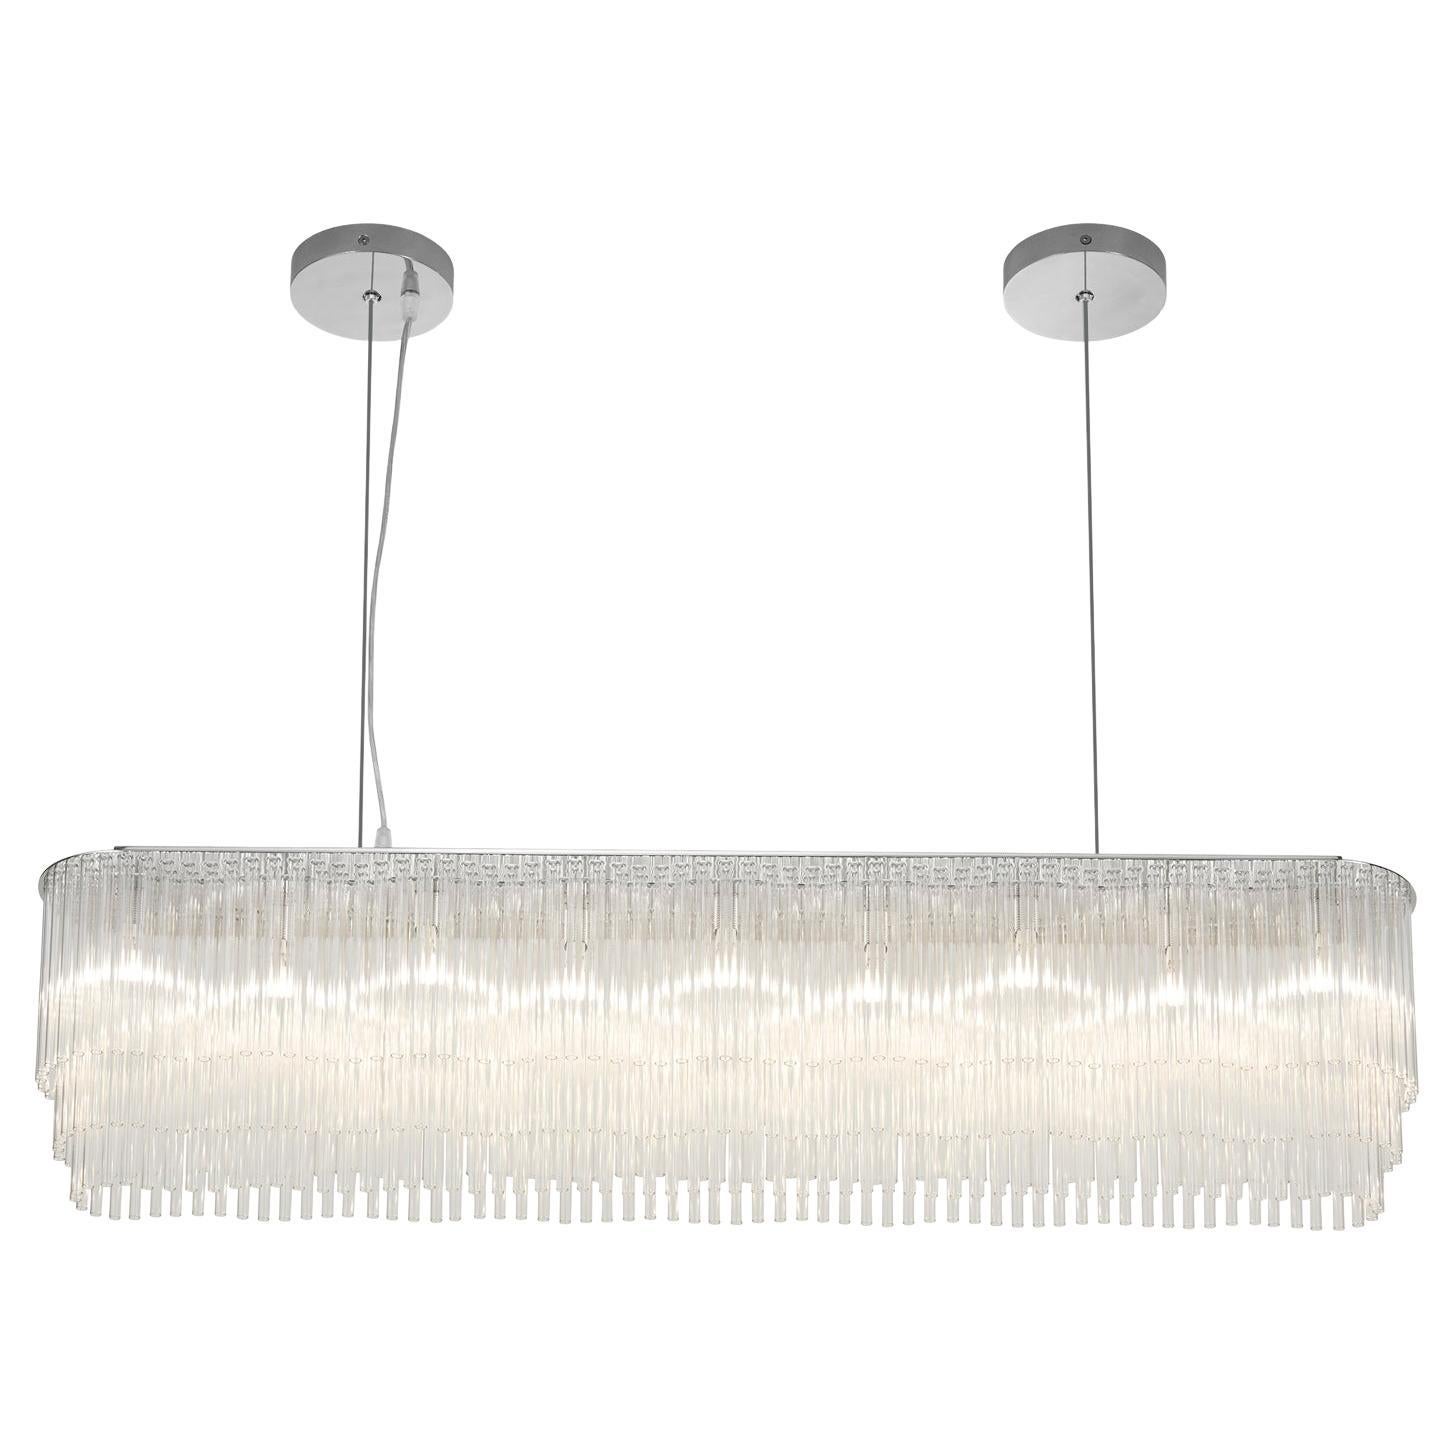 Linear Chandelier Thin 1445mm/58.75" in Polished Chrome / Tiered Glass Profile For Sale